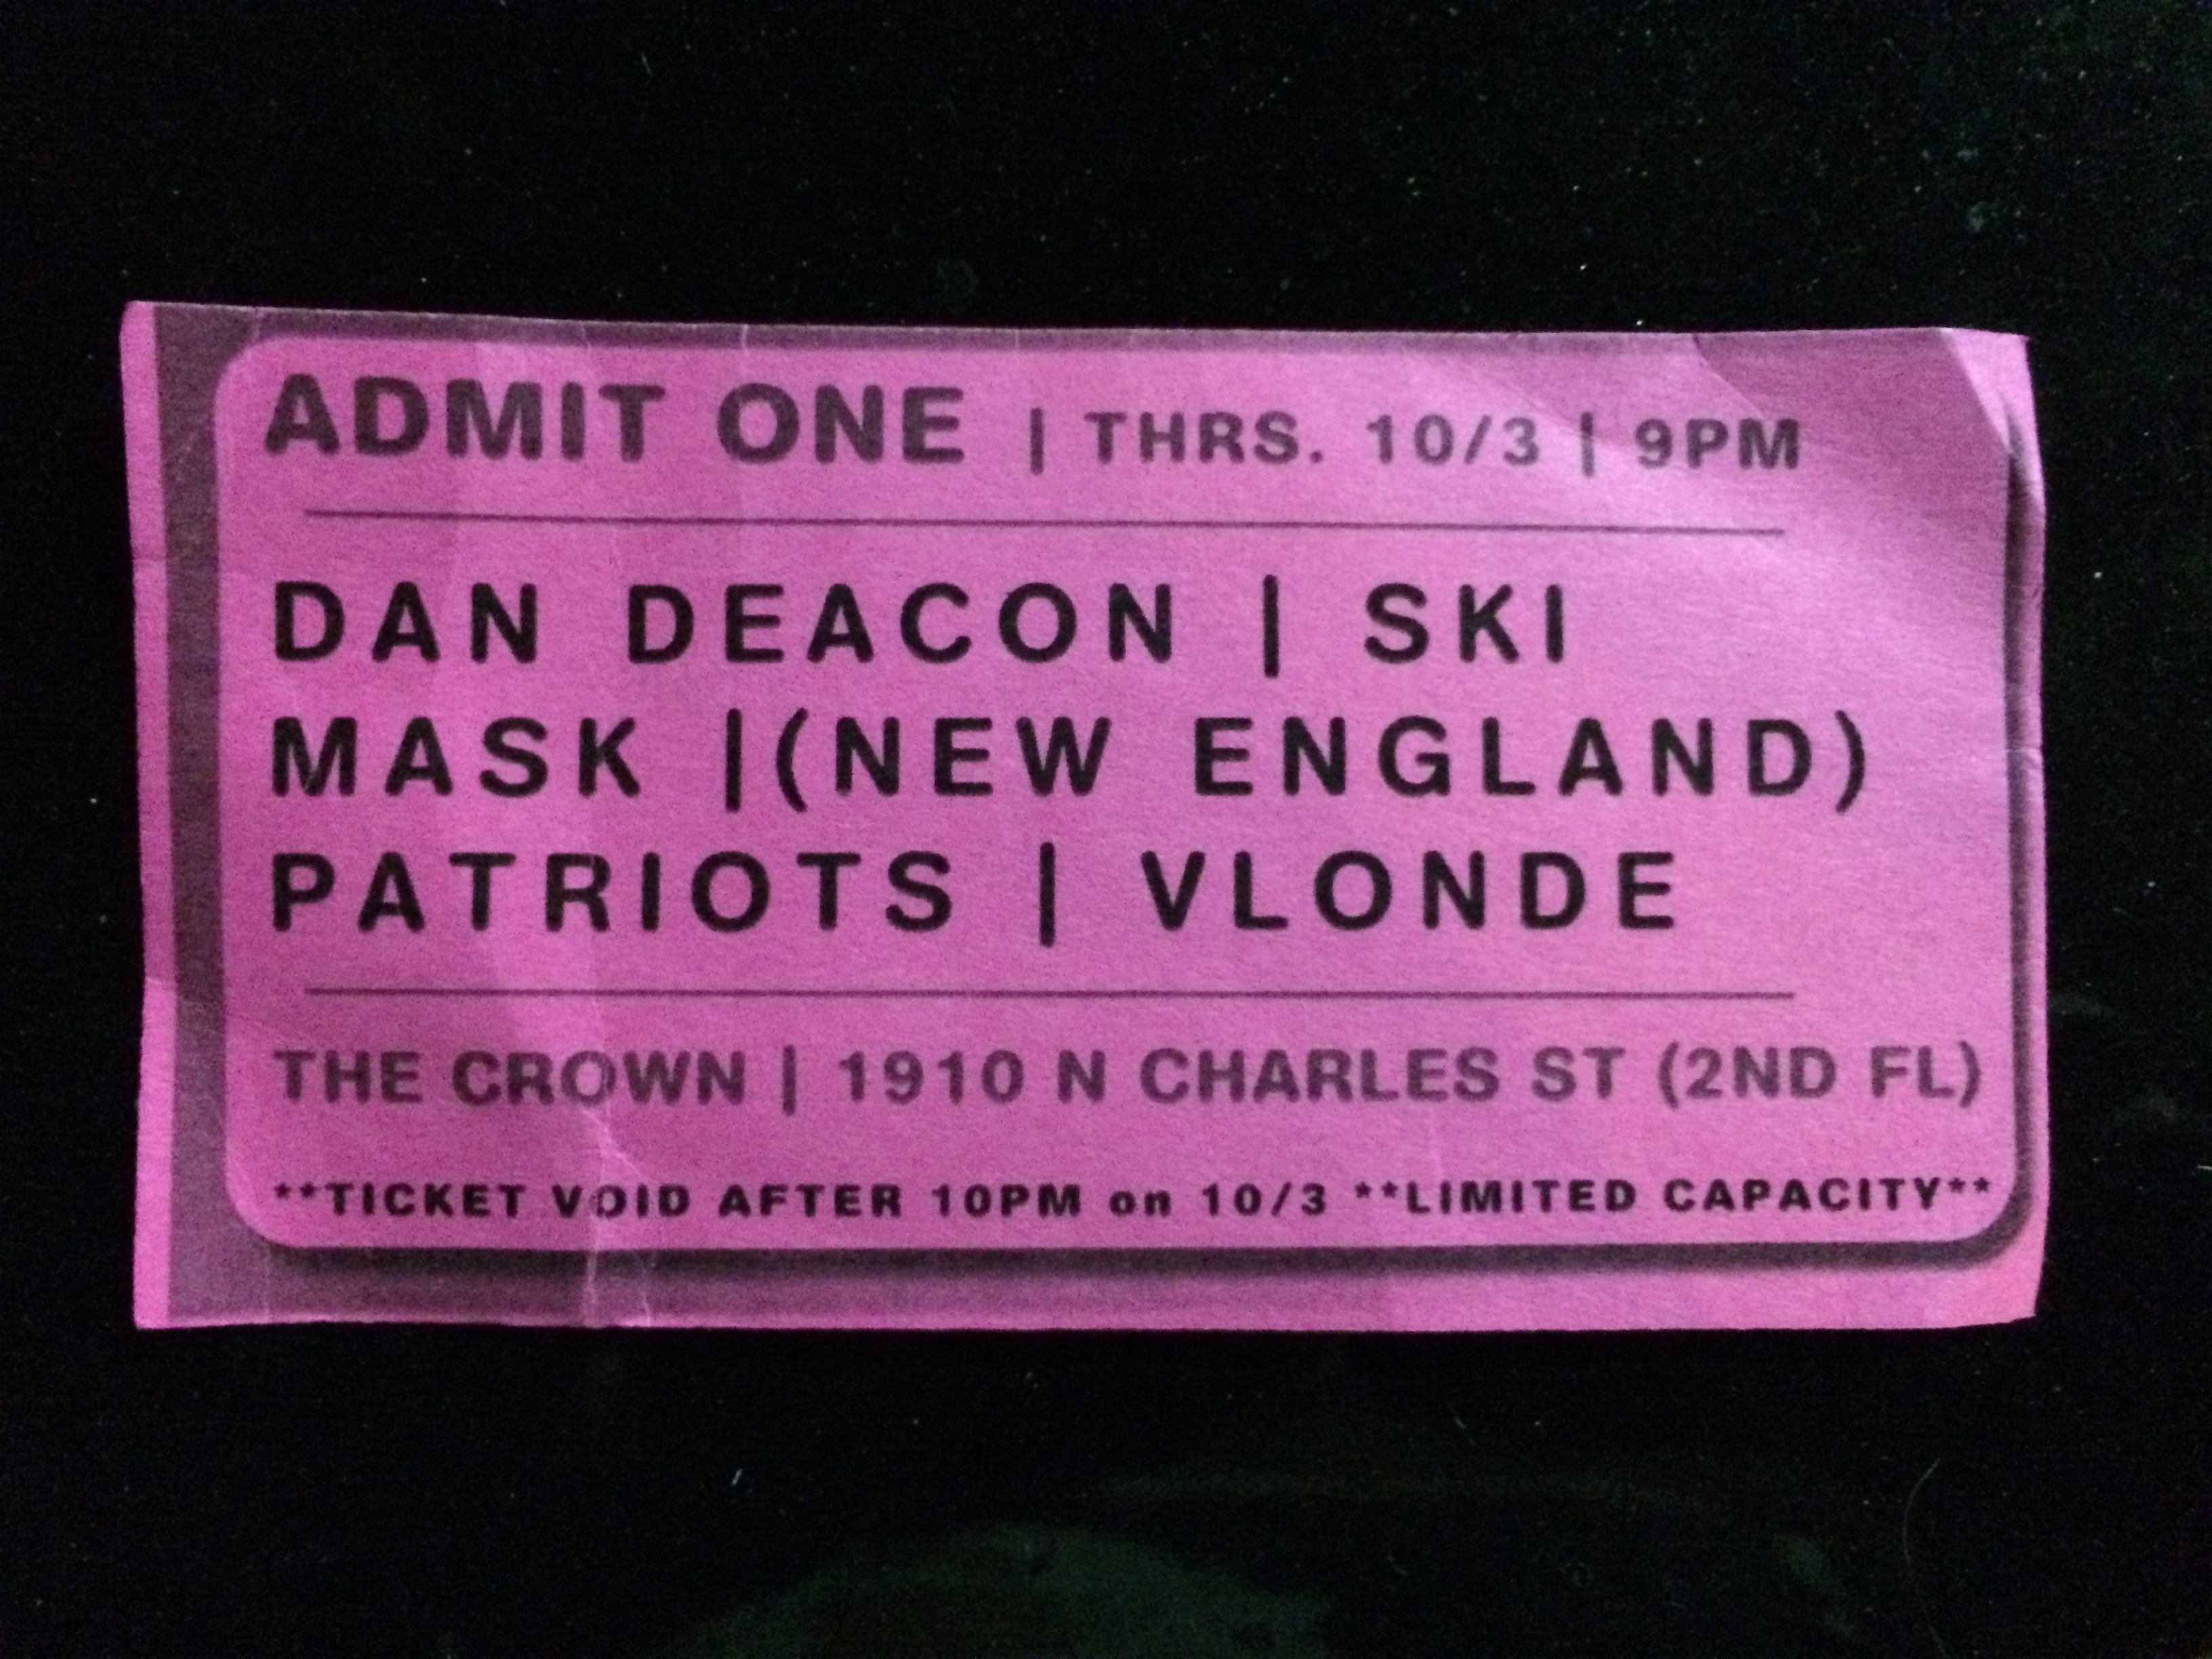 A ticket for Dan Deacon's show last night at the Crown.